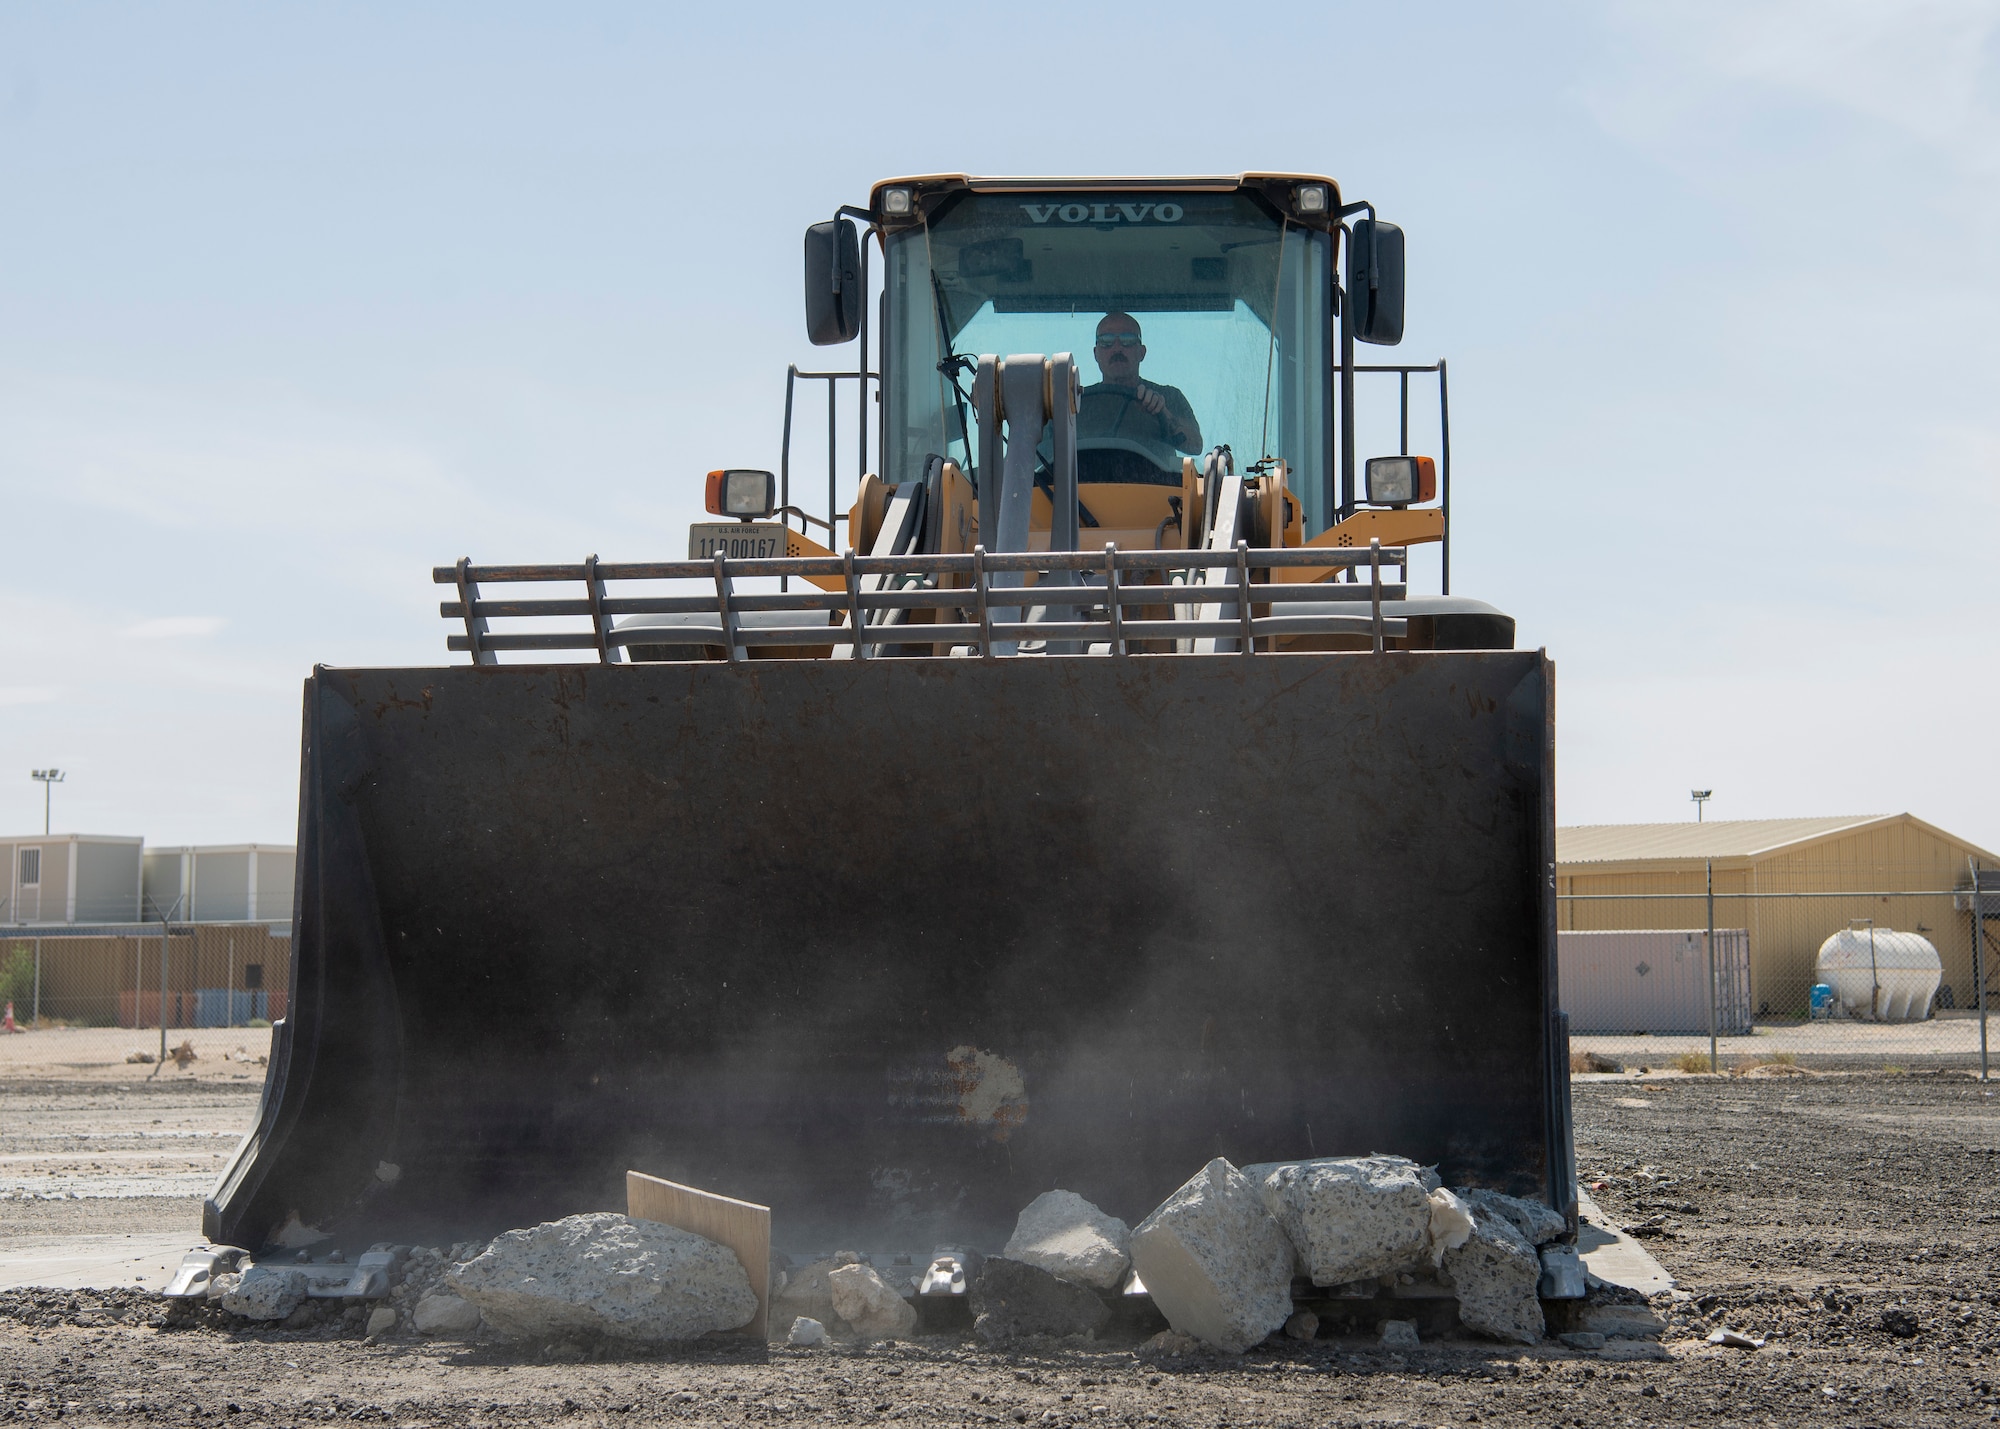 Airmen use heavy equipment to clear debris from runway.